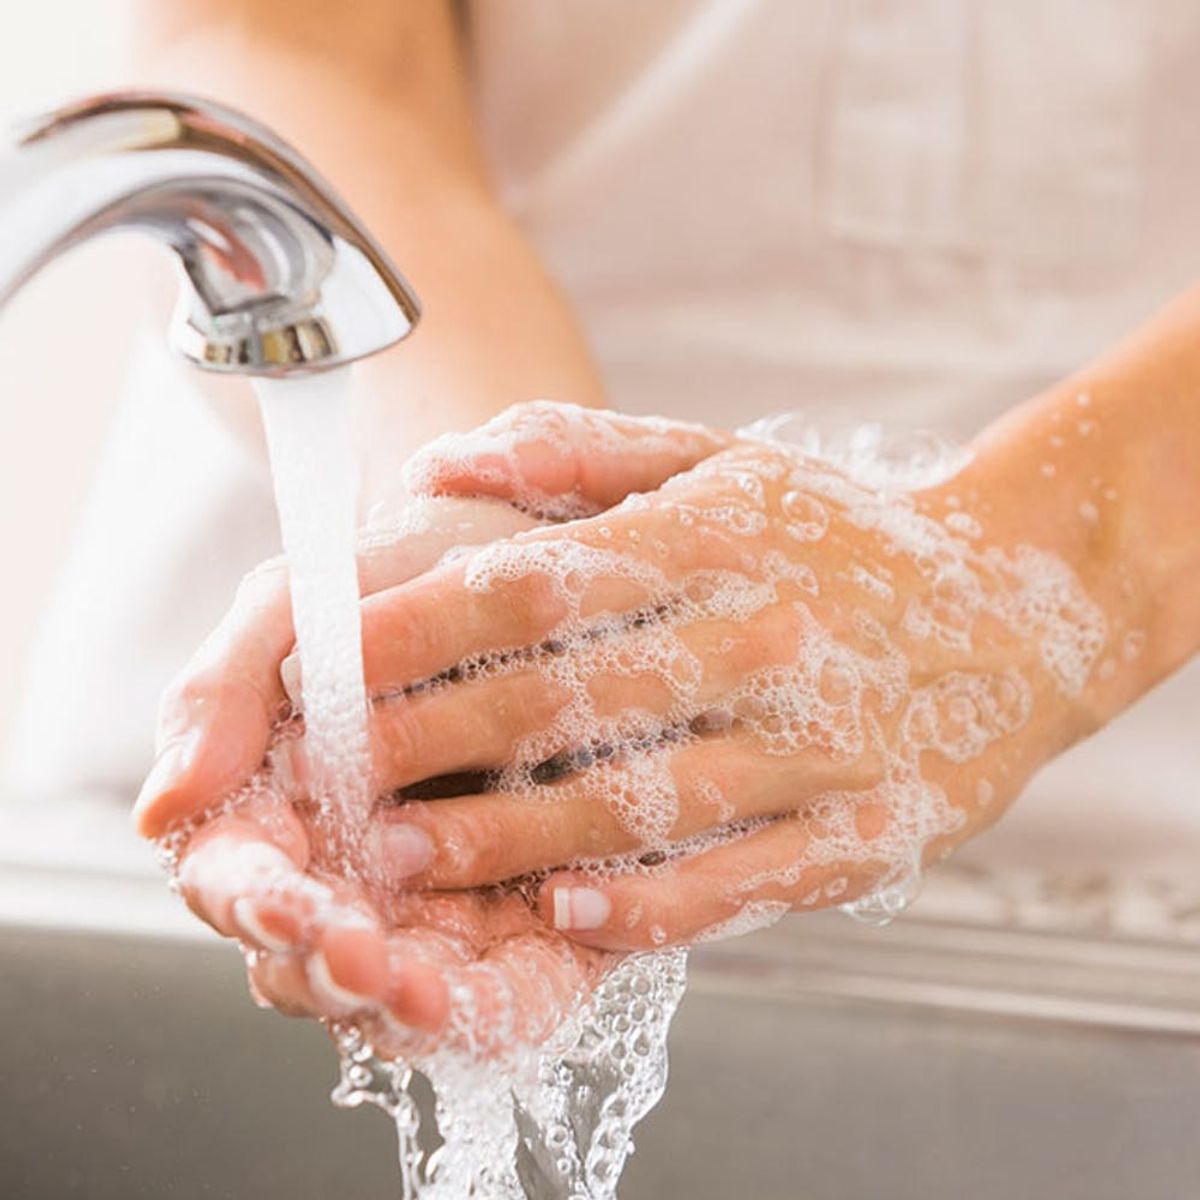 You’ve Probably Been Washing Your Hands Wrong Your Whole Life